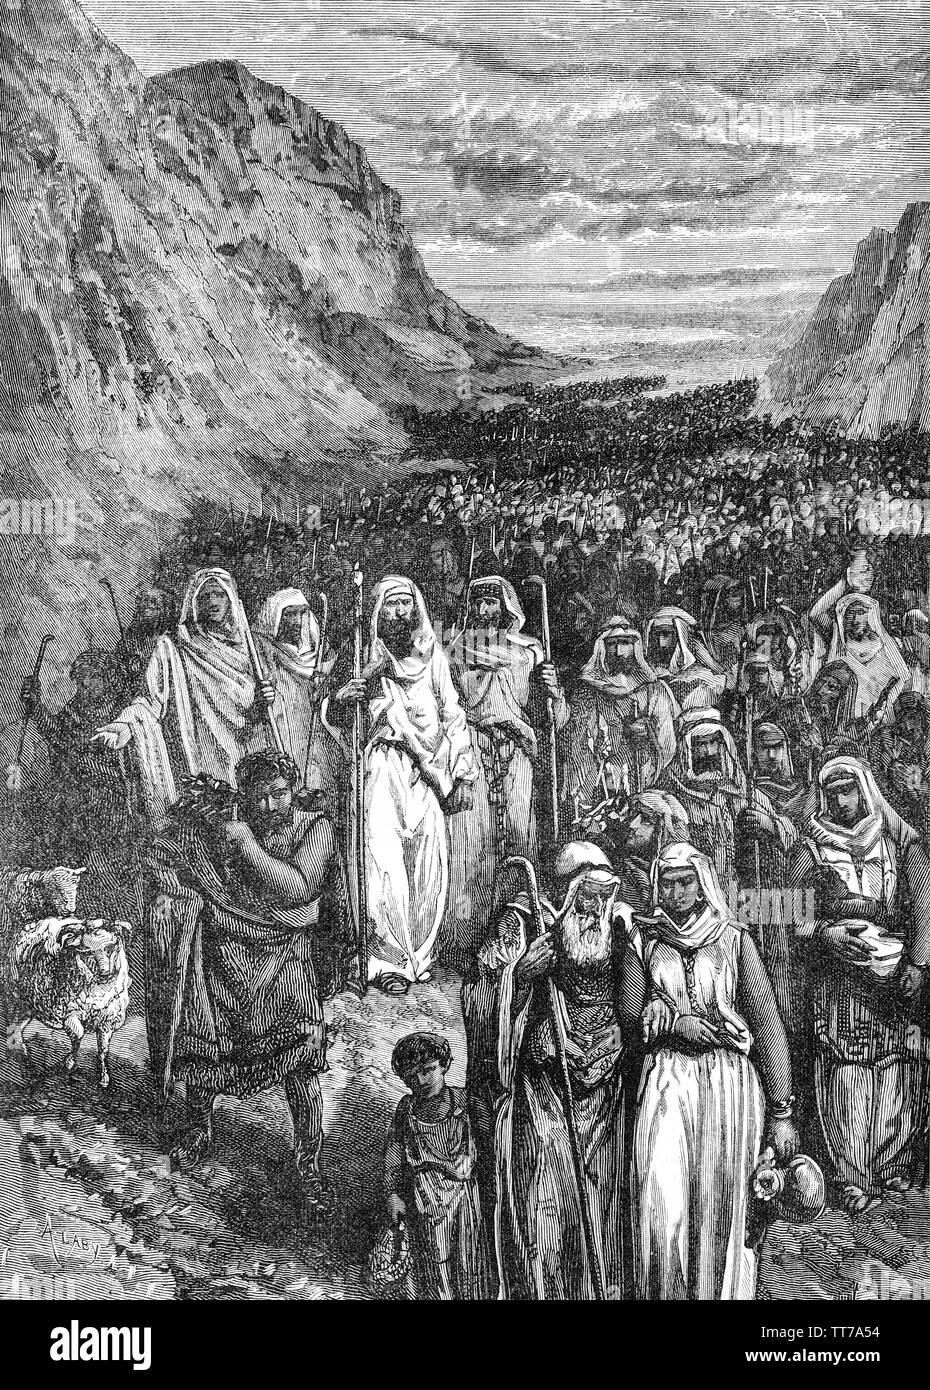 The Exodus around C.1313 BC, is the founding myth of the Israelites and describes the march in which the prophet Moses lead them out of Egypt and through the wilderness to Mount Sinai, where Yahweh, the national god of the Iron Age kingdoms of Israel reveals himself to his people and establishes the Mosaic covenant. They are to keep his torah or law, and in return he will give them the land of Canaan. Stock Photo